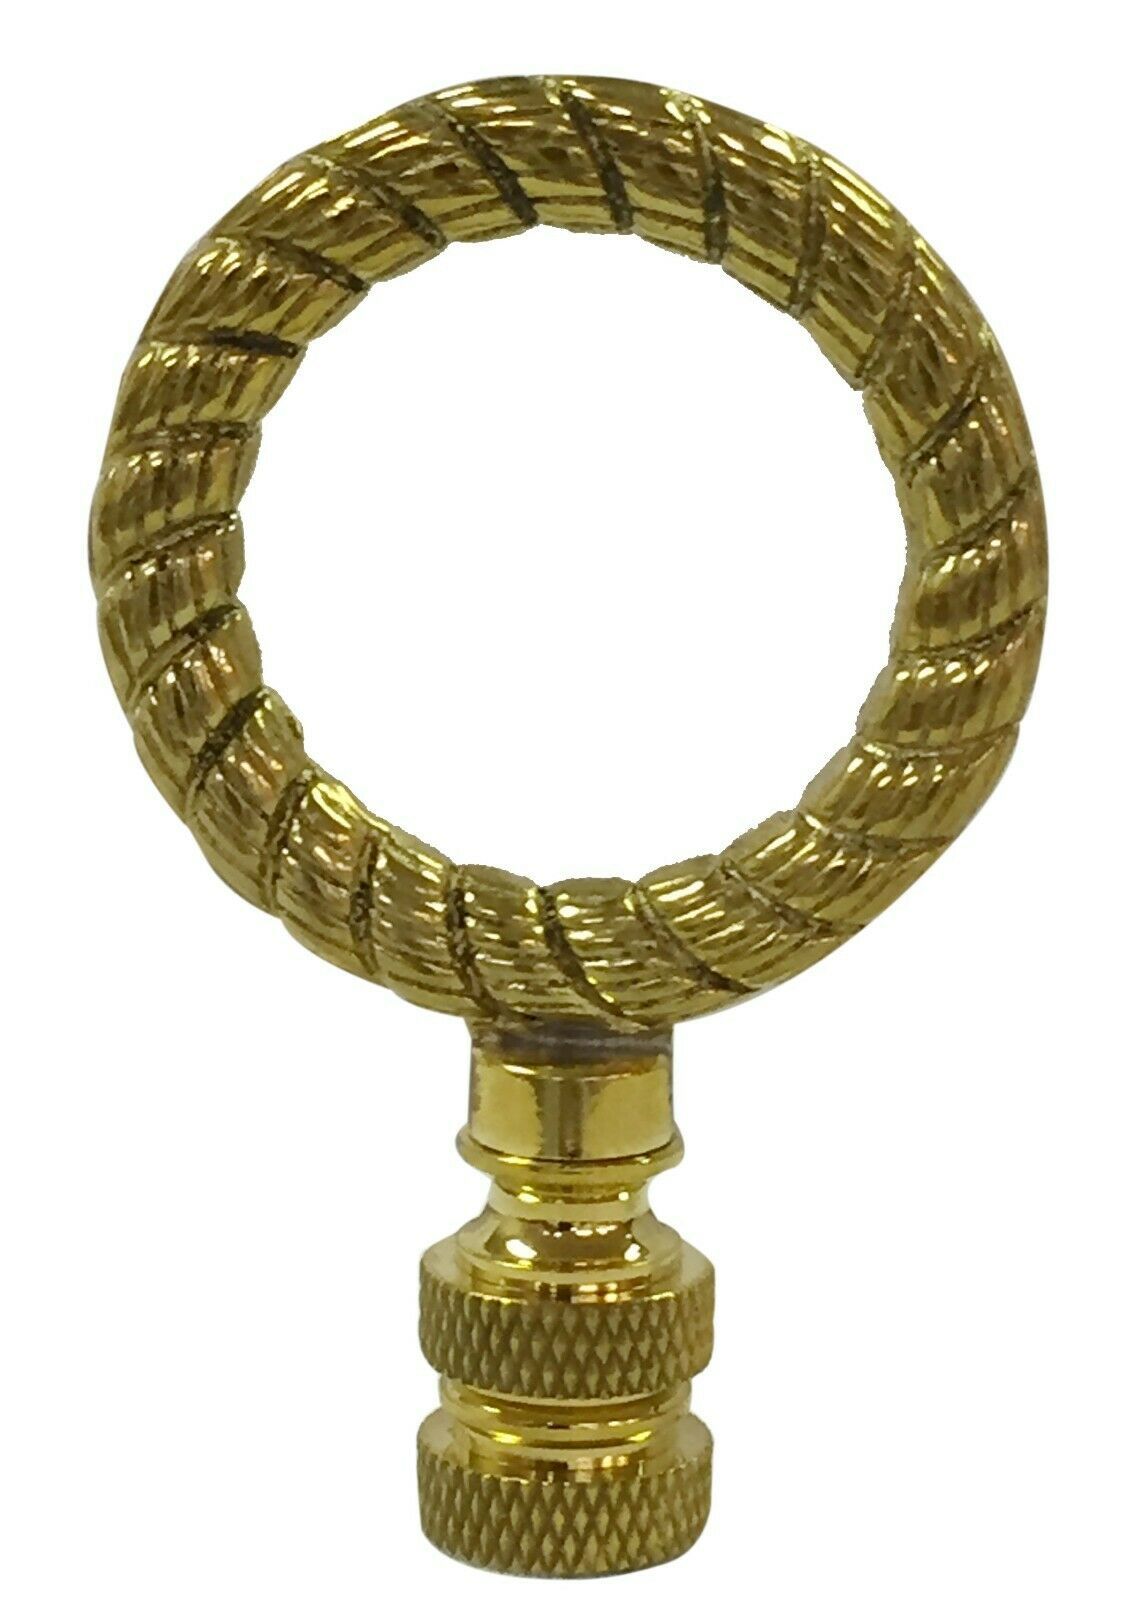 Royal Designs Lamp Finial Nautical Rope Wreath Shade Topper Polished Brass